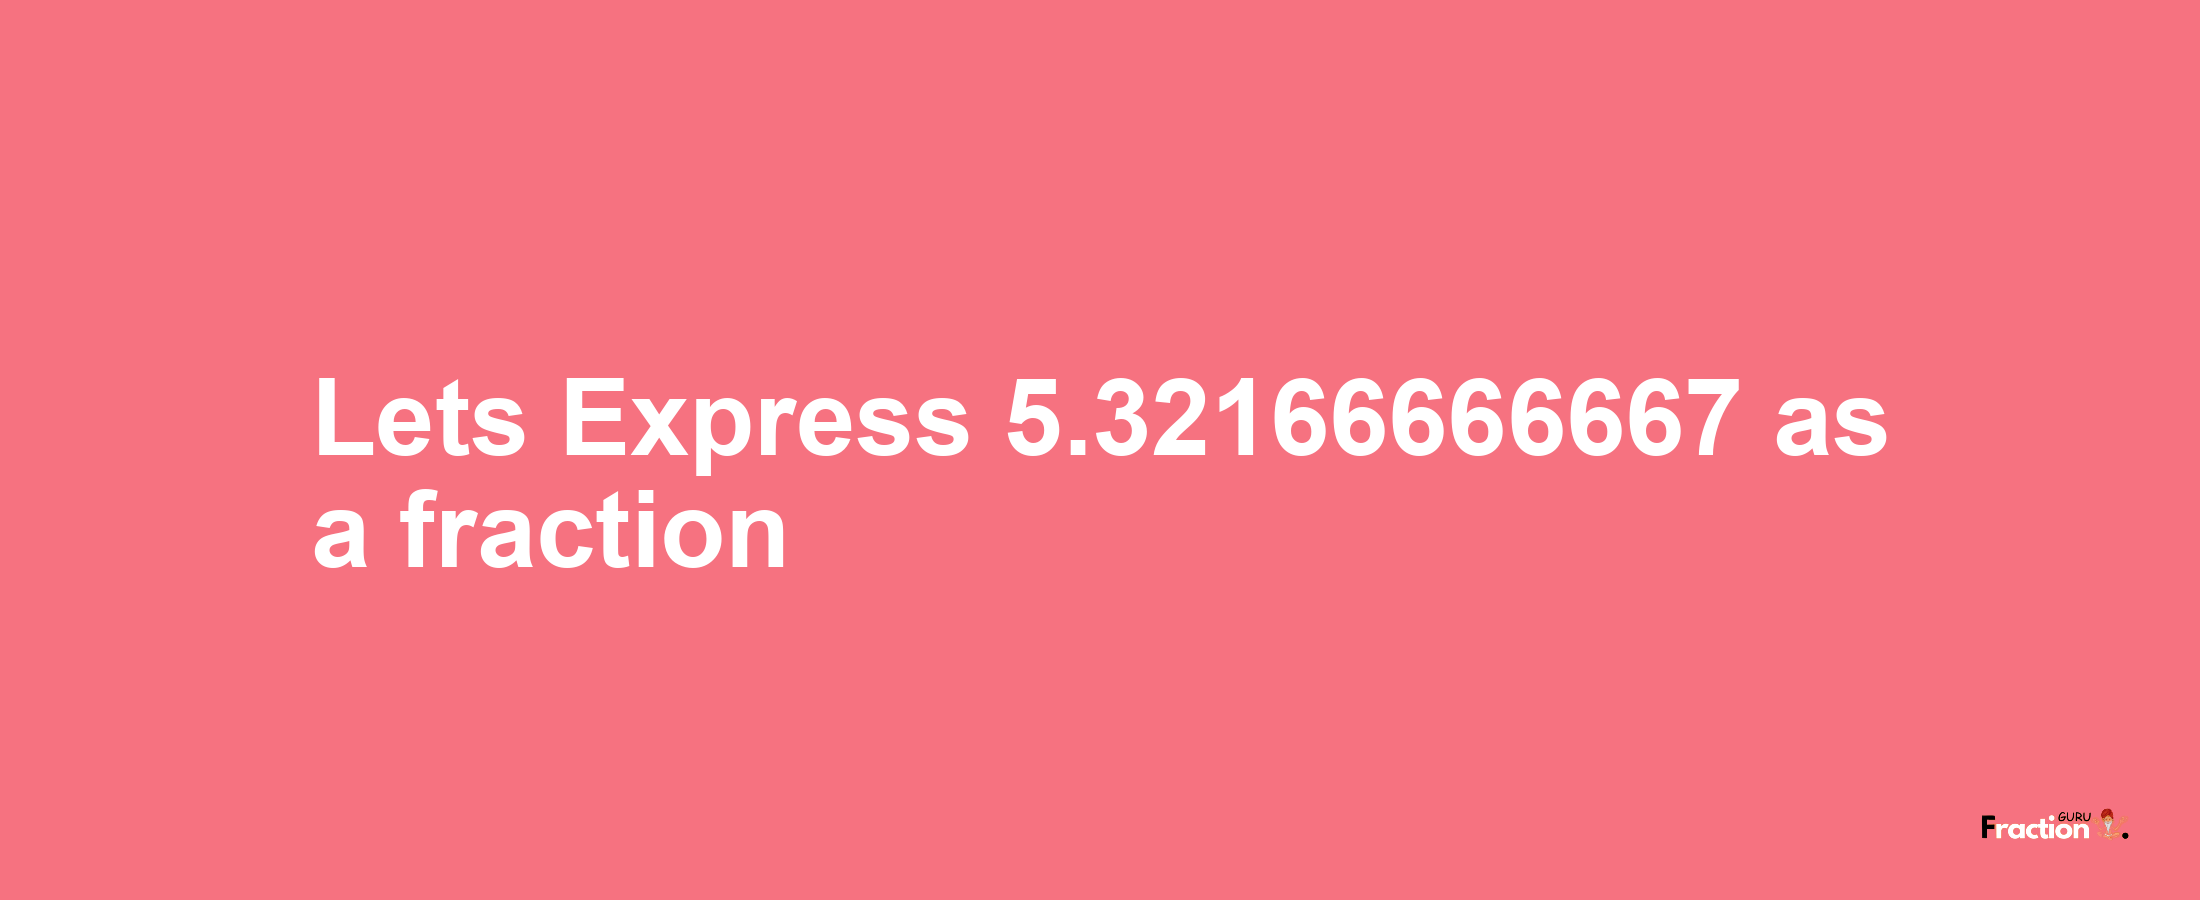 Lets Express 5.32166666667 as afraction